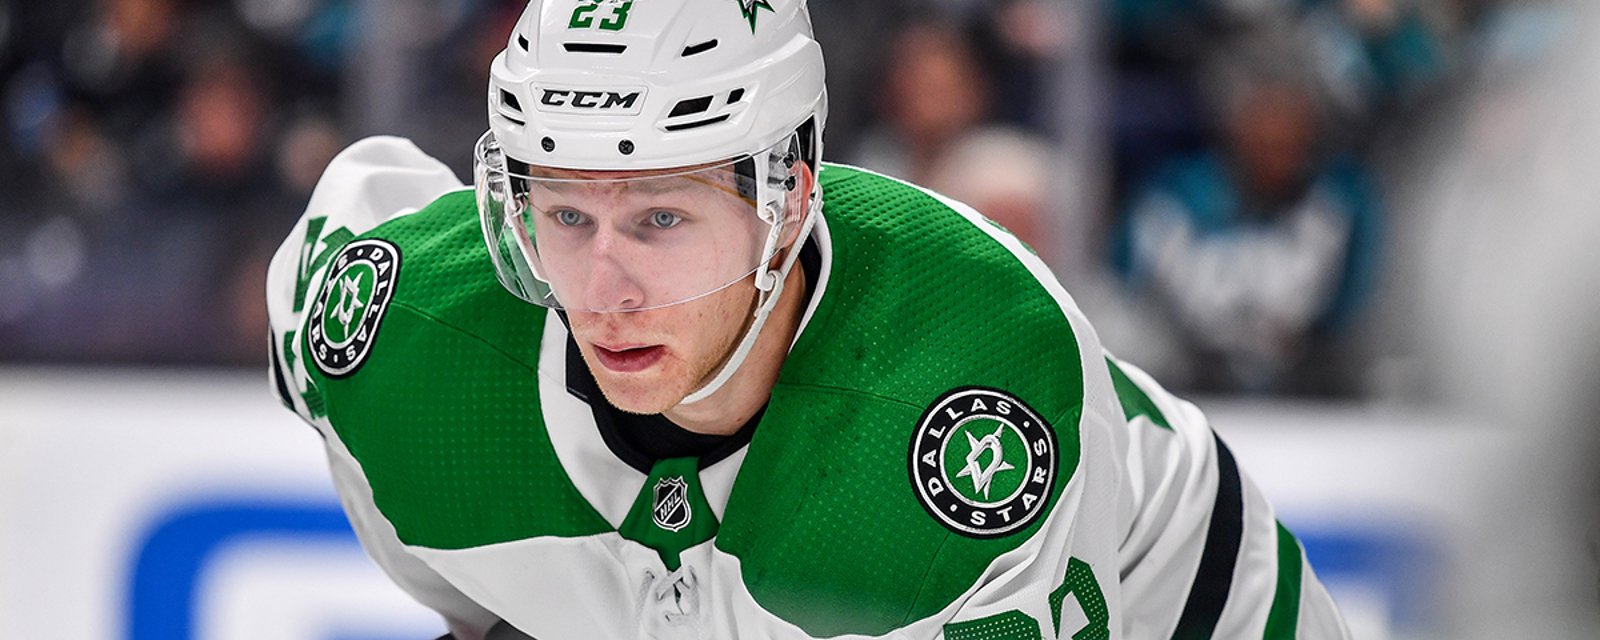 ICYMI: Stars sign Lindell to a huge long-term contract